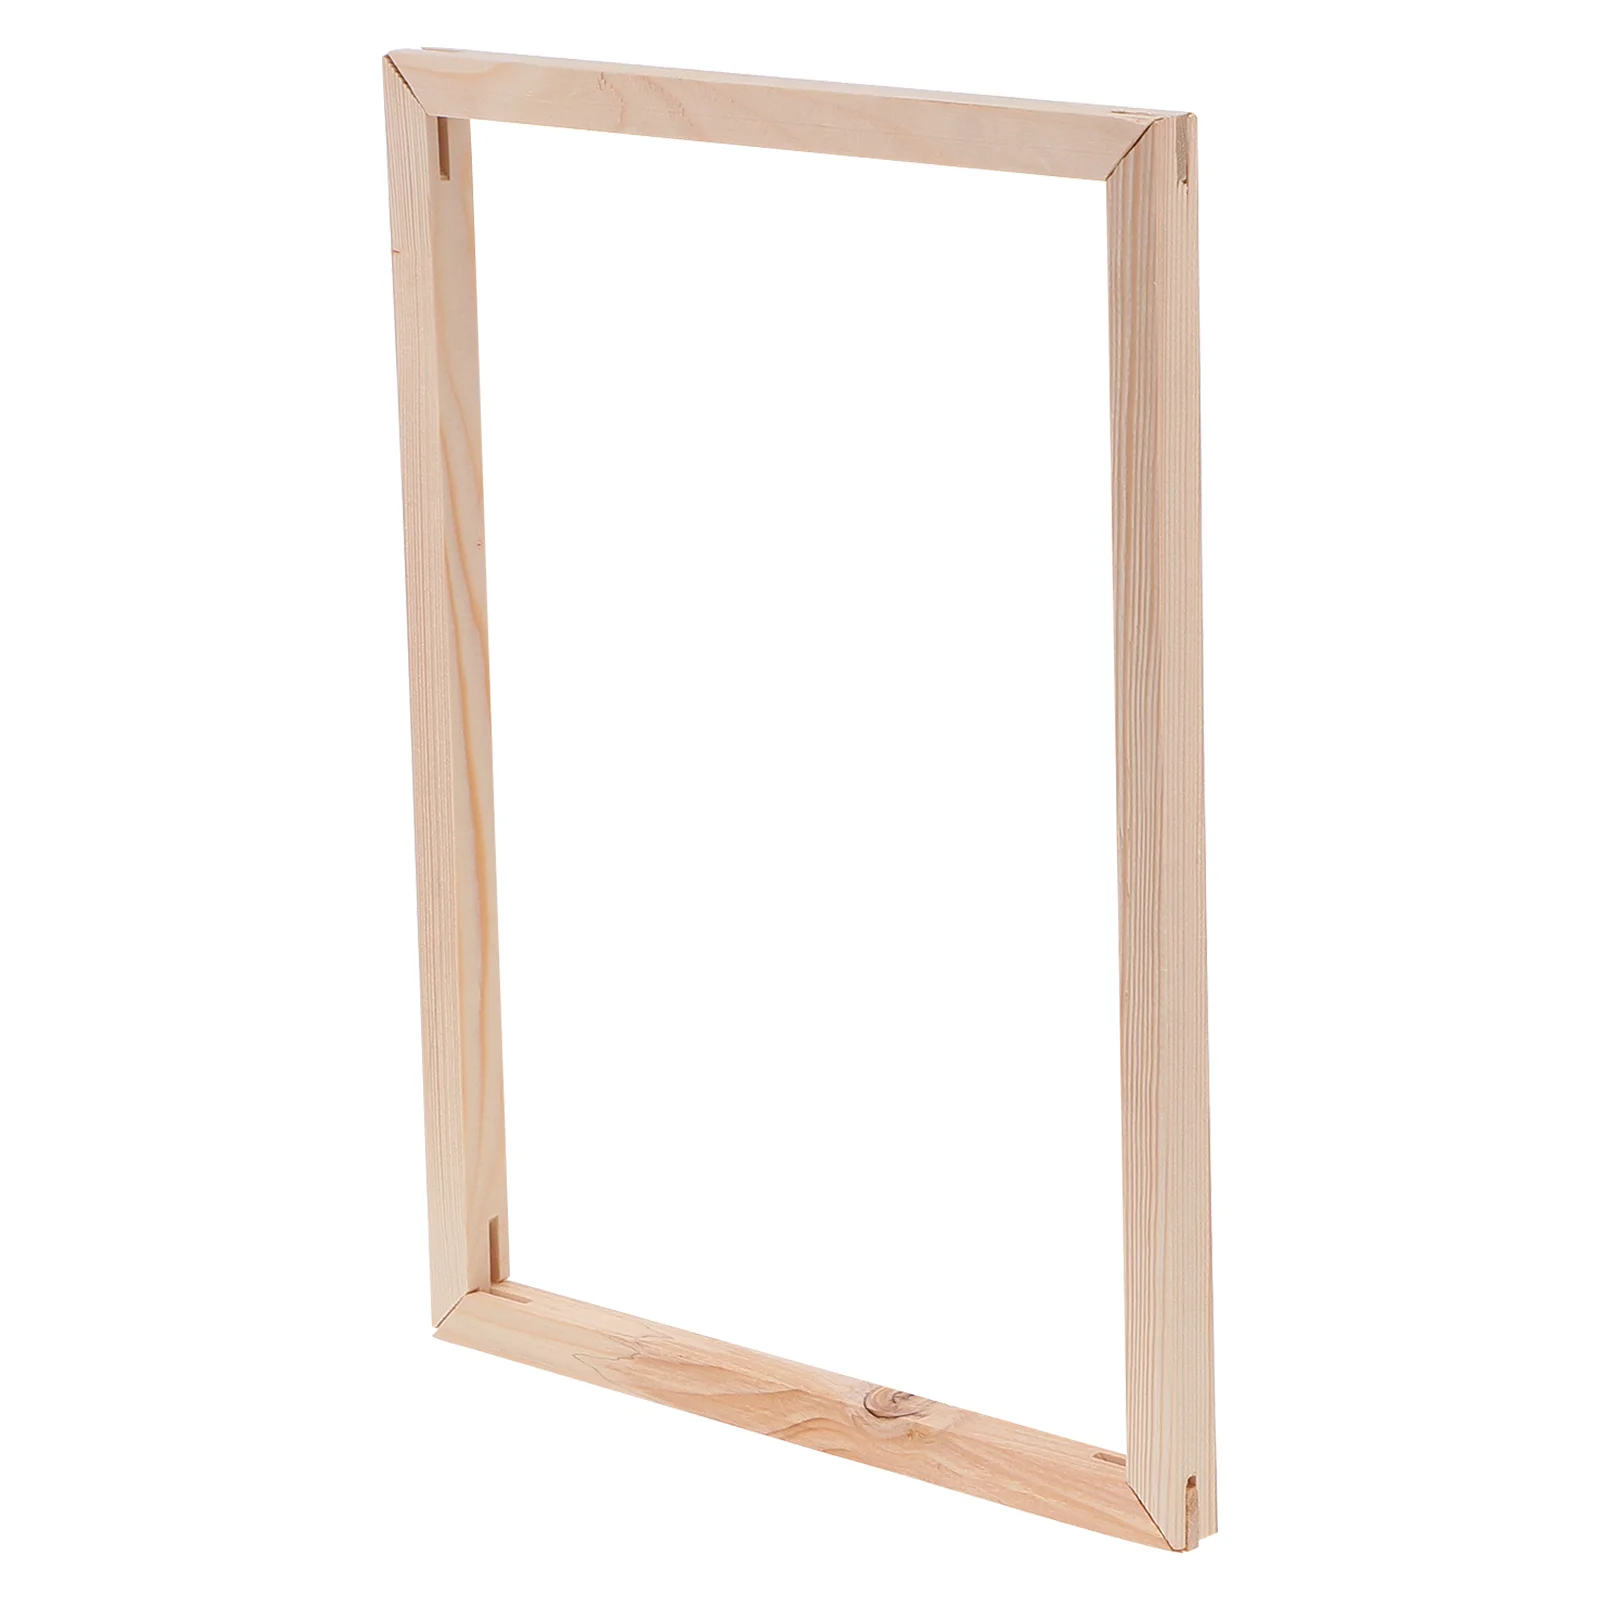 Canvas Wood Stretcher Wooden Stretcher Bars Canvas Floater Frames Fabric Stretcher Frame Stretcher Bars Picture Canvas